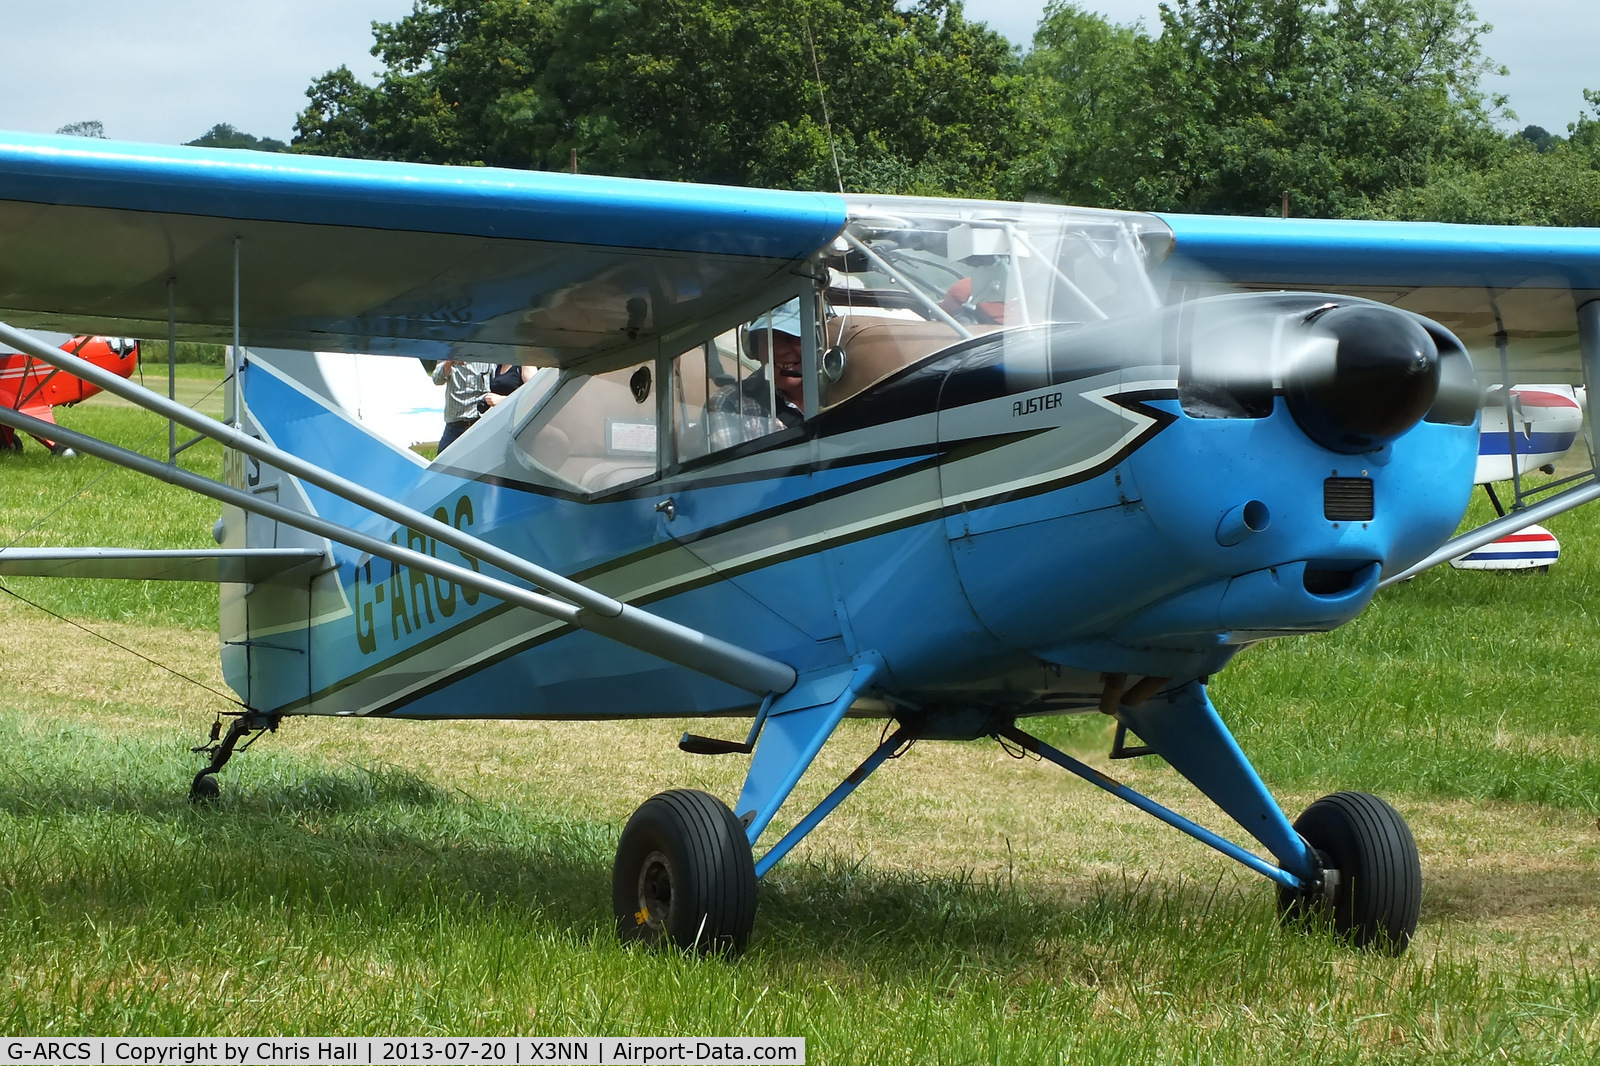 G-ARCS, 1960 Auster D6-180 C/N 3703, at the Stoke Golding stakeout 2013